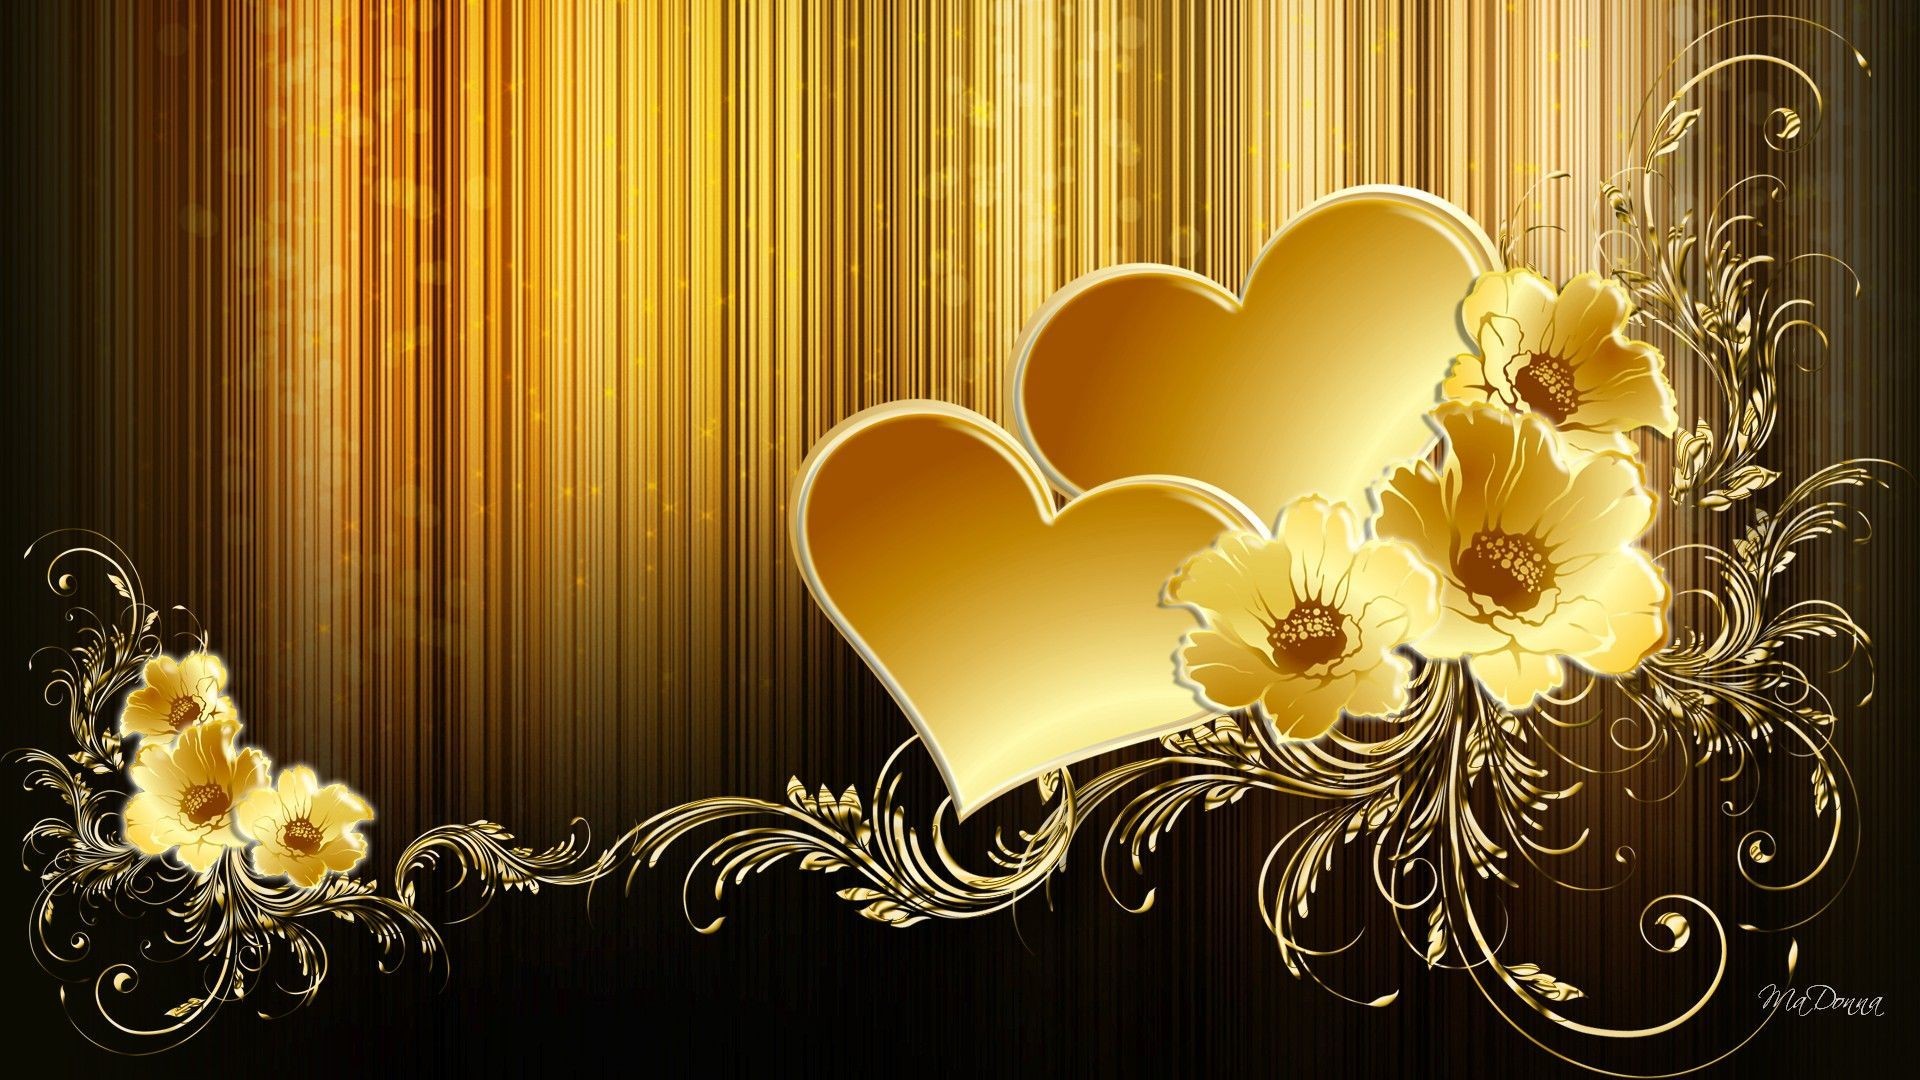 Black and Gold Wallpaper | 2020 Cute Wallpapers